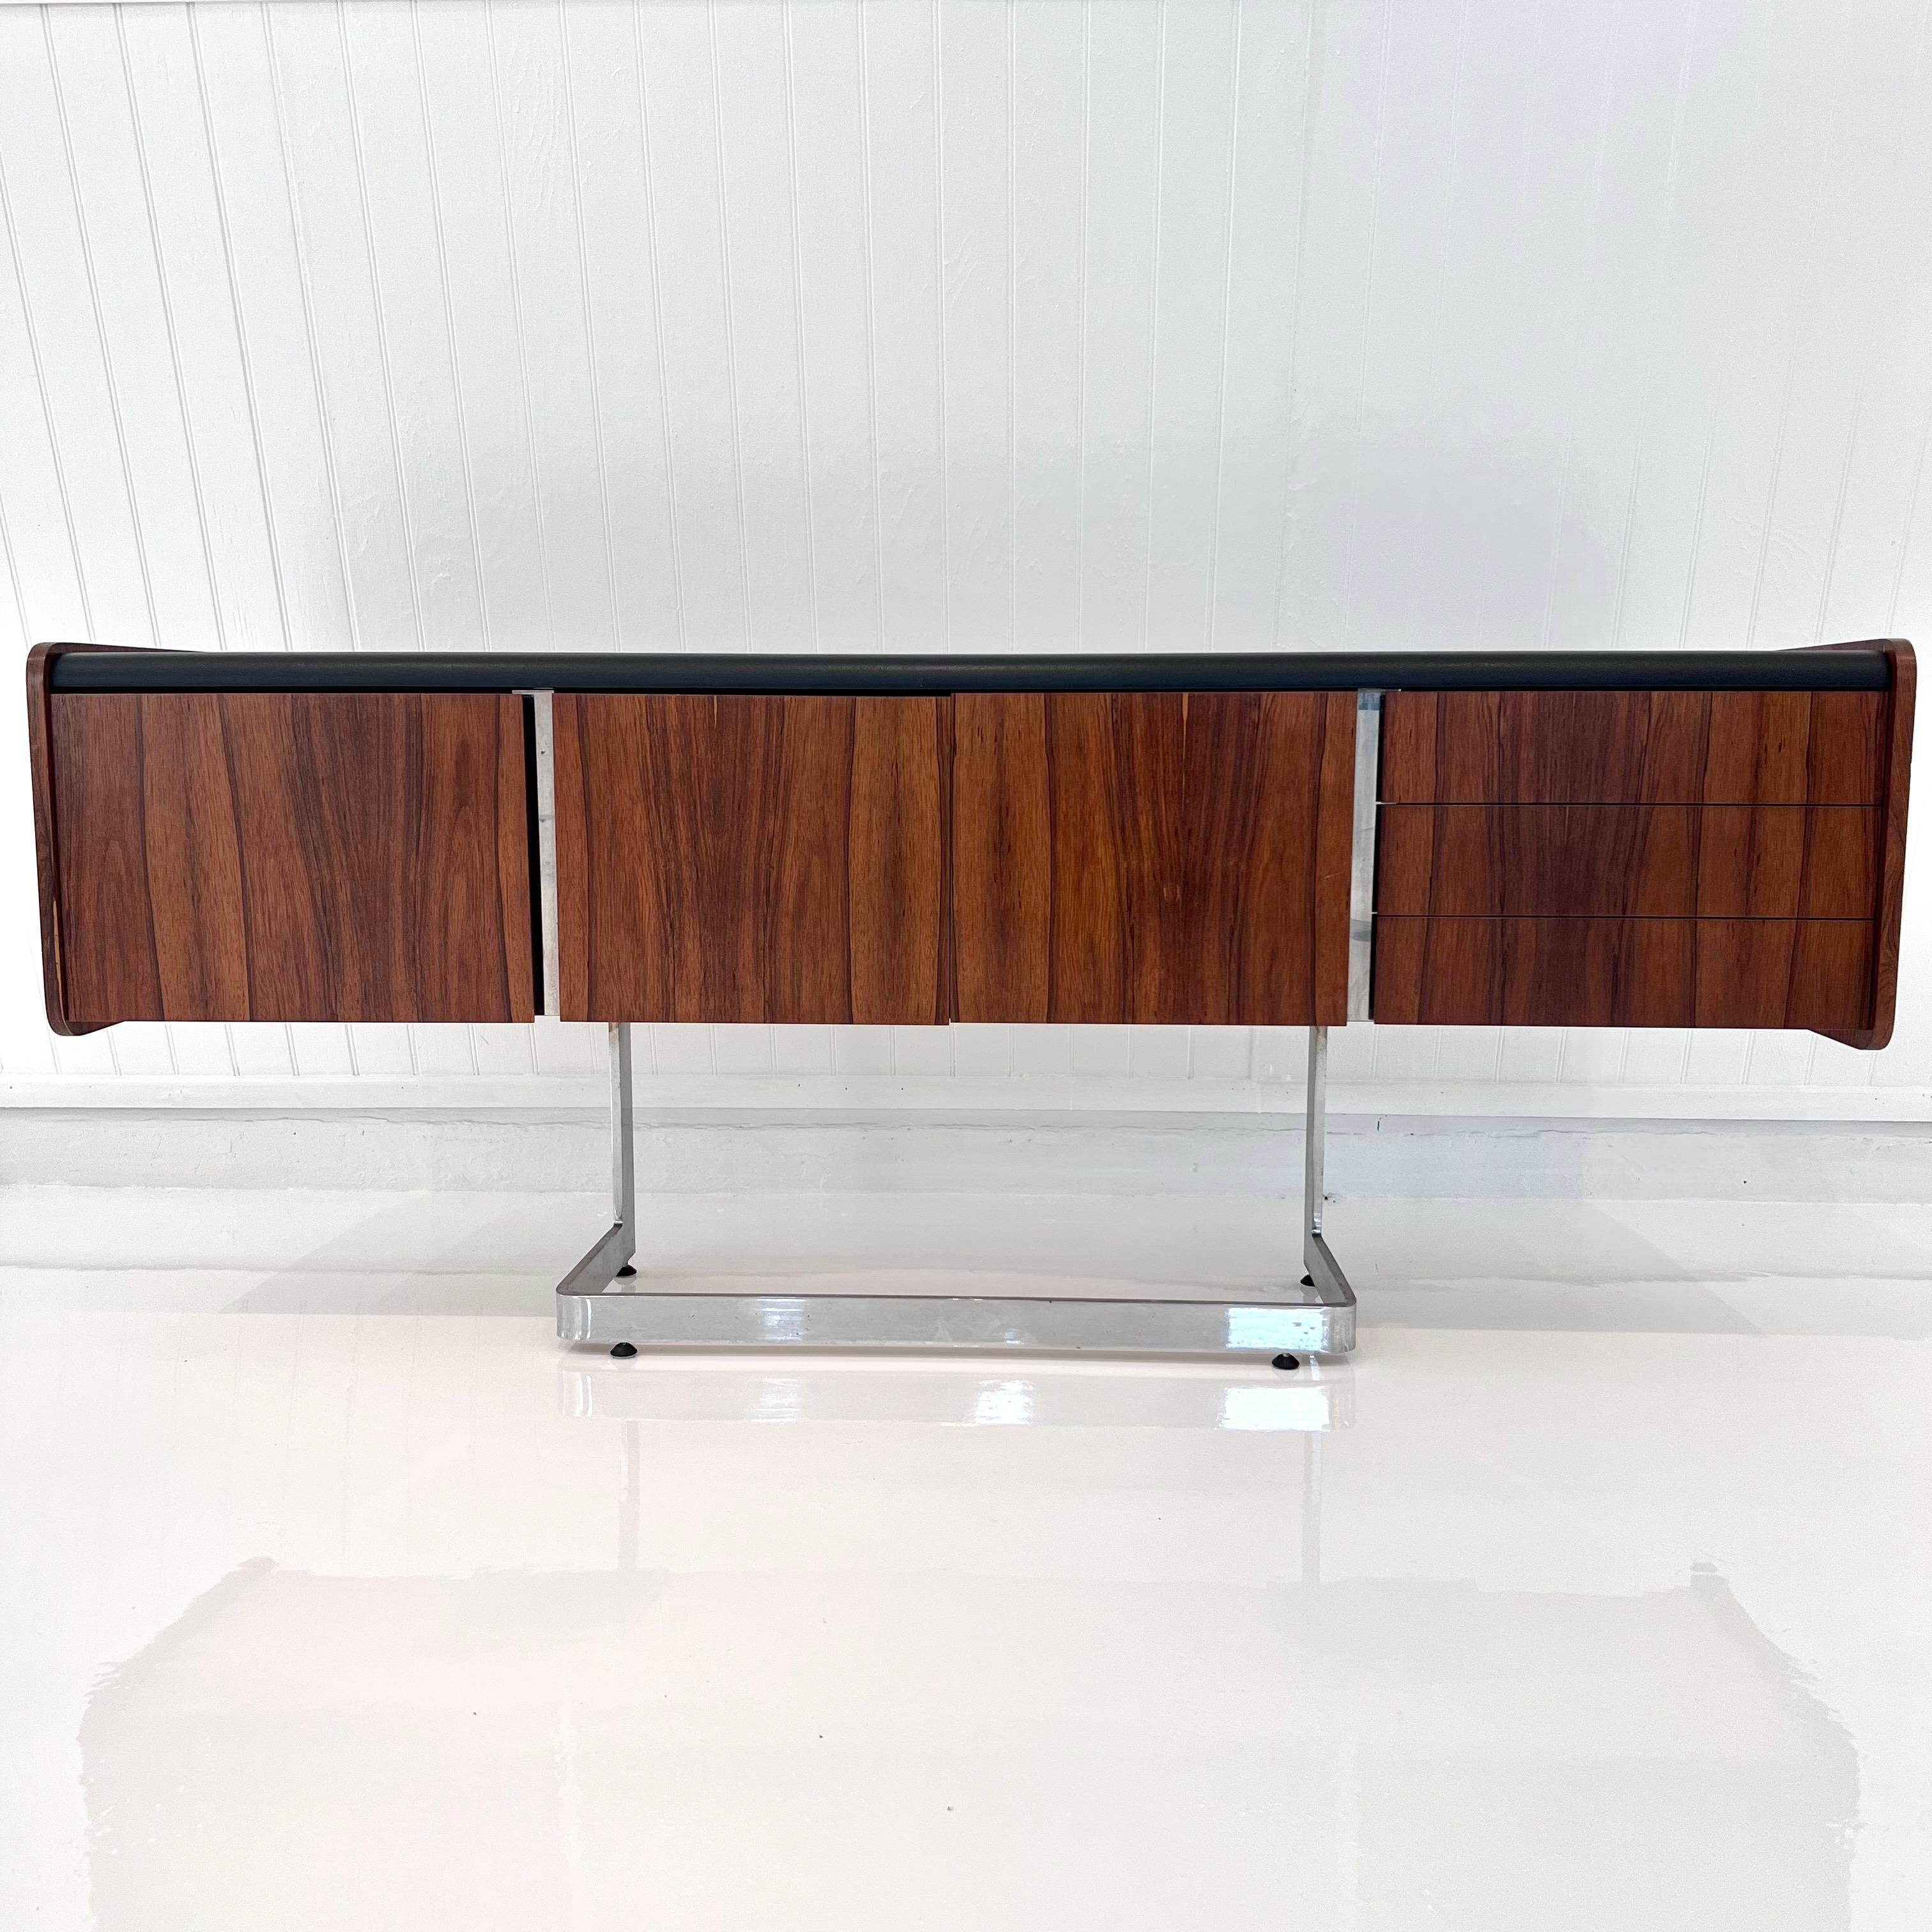 Stunning credenza by Ste. Marie & Laurent made in the 1970s, Canada. Floating rosewood and vinyl desk with angular chrome base. One large drawer on the left hand side as well as the center and 3 small drawers on the right hand side. Black vinyl top